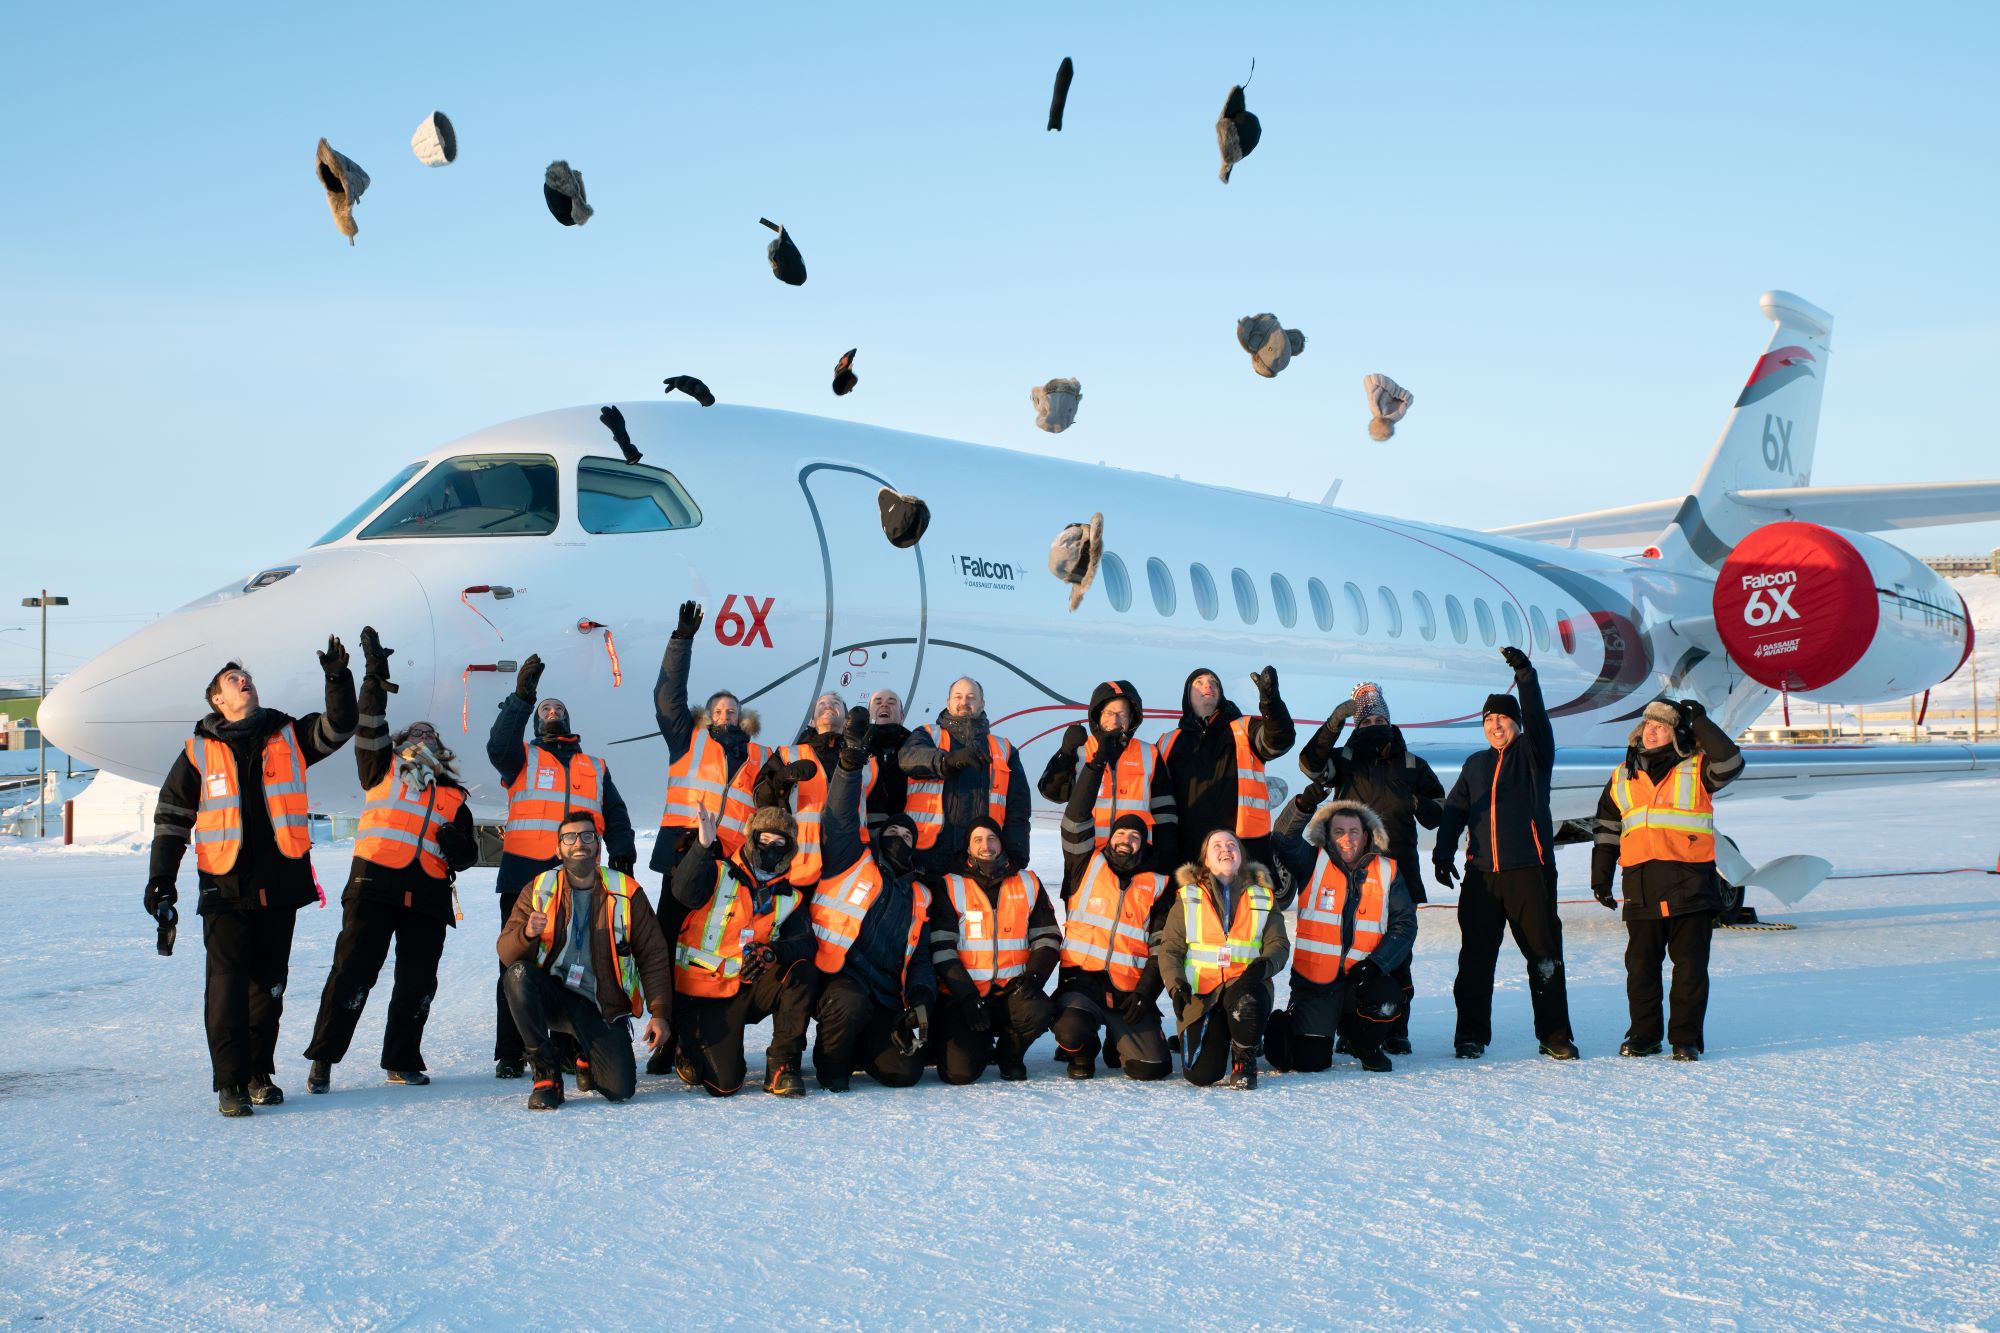 Press Release  -  Falcon 6X  with  PW812D  engines  completed  it's  cold  soak  tests  at  -37°C   temperature   of   Iqaluit ,Canada !